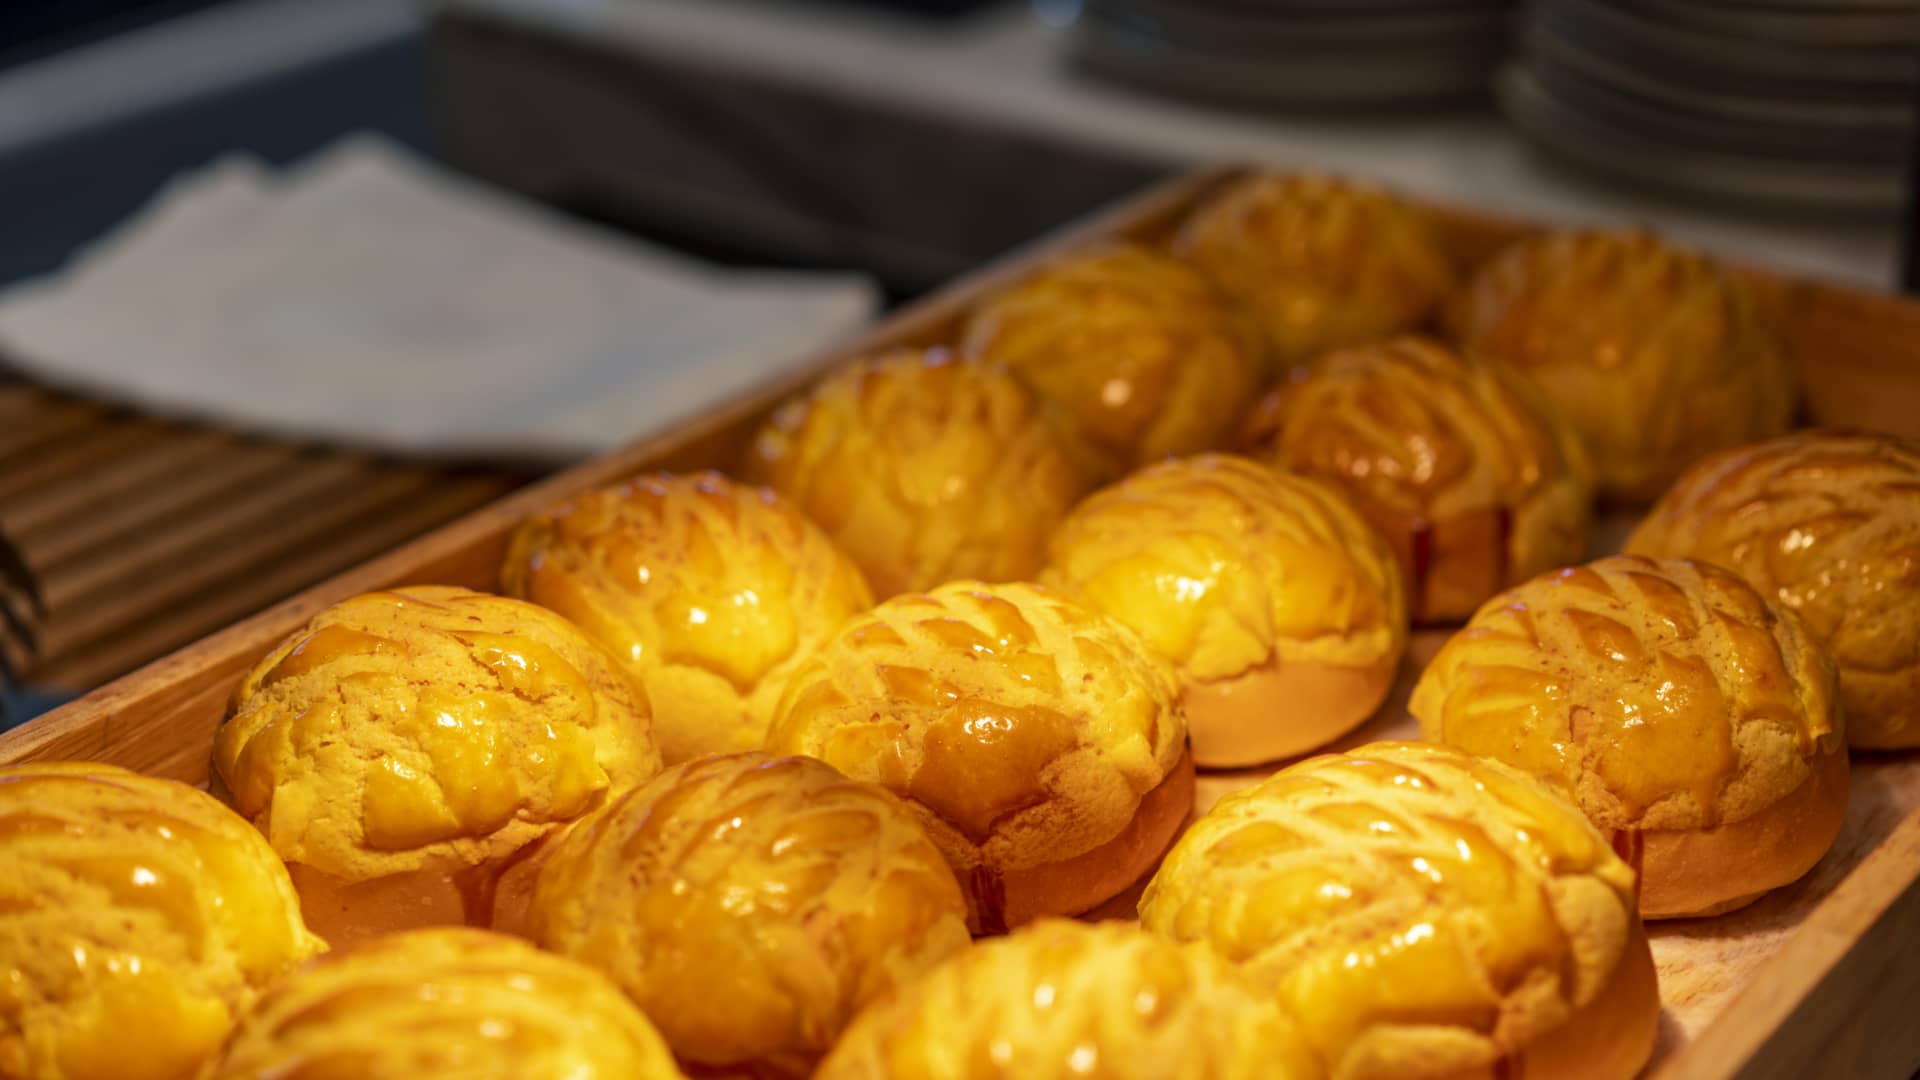 Pineapple buns, commonly known as bolo buns, are a popular snack in Hong Kong.